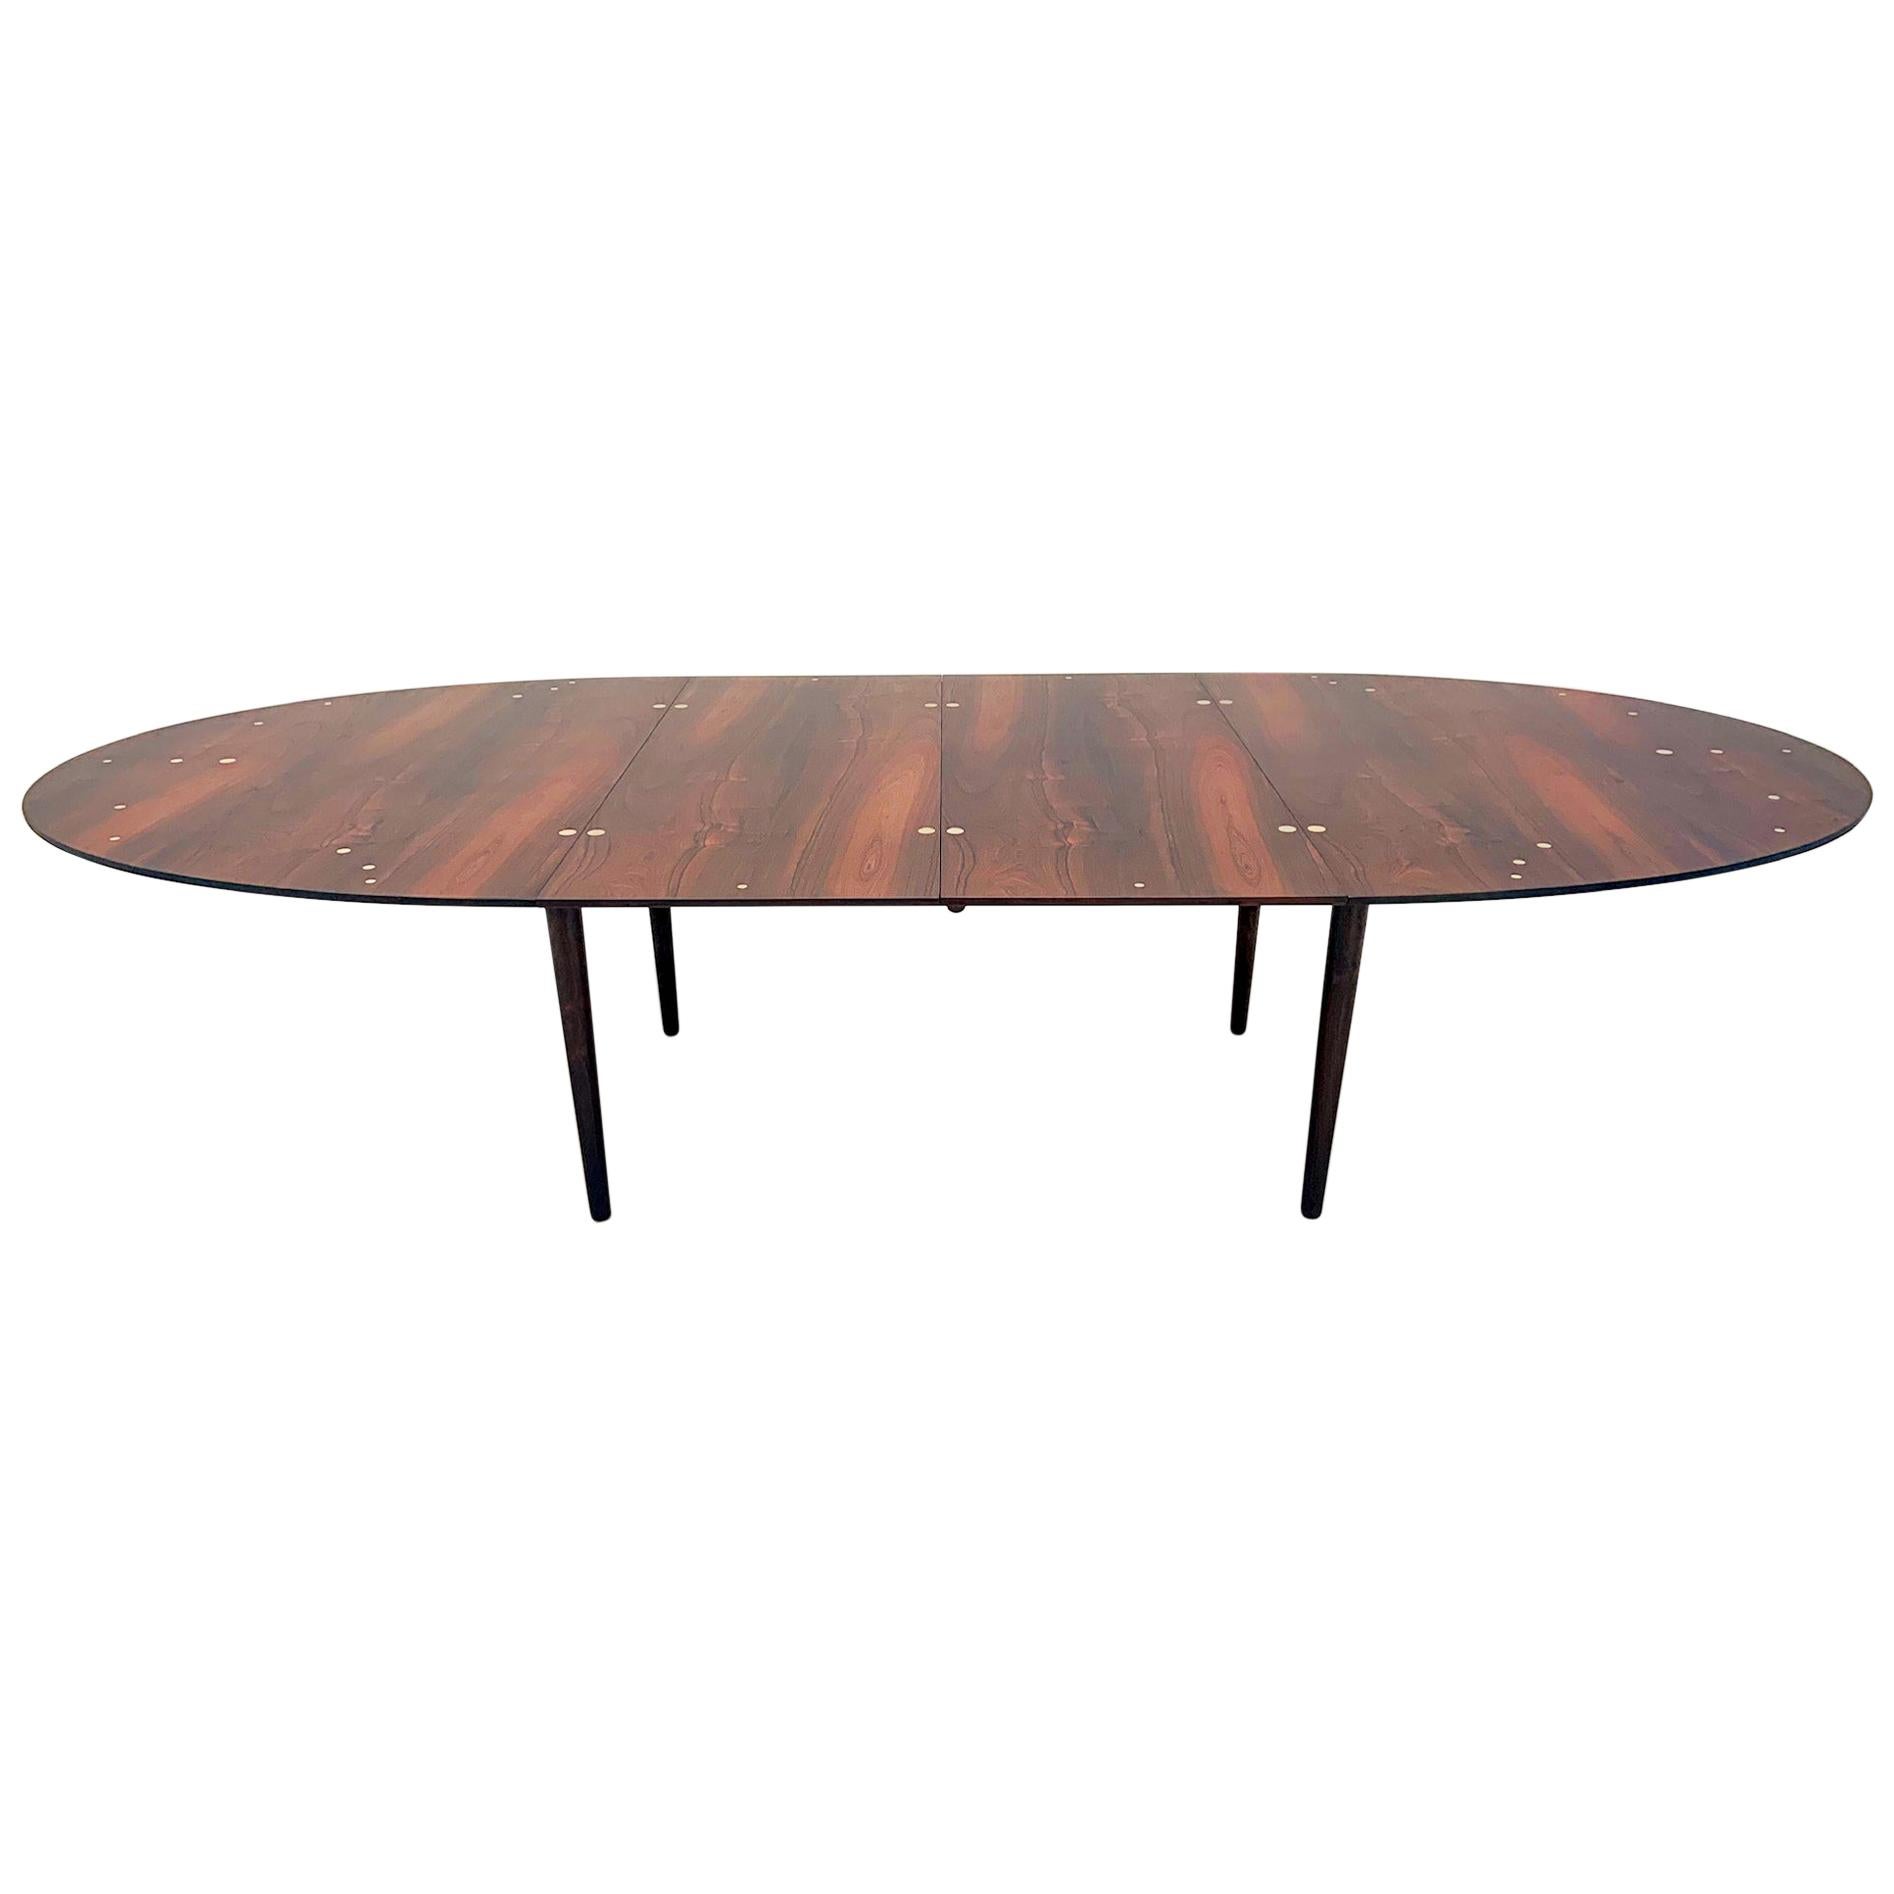 Finn Juhl "Judas" Table in Rosewood and Sterling Silver for Niels Vodder For Sale